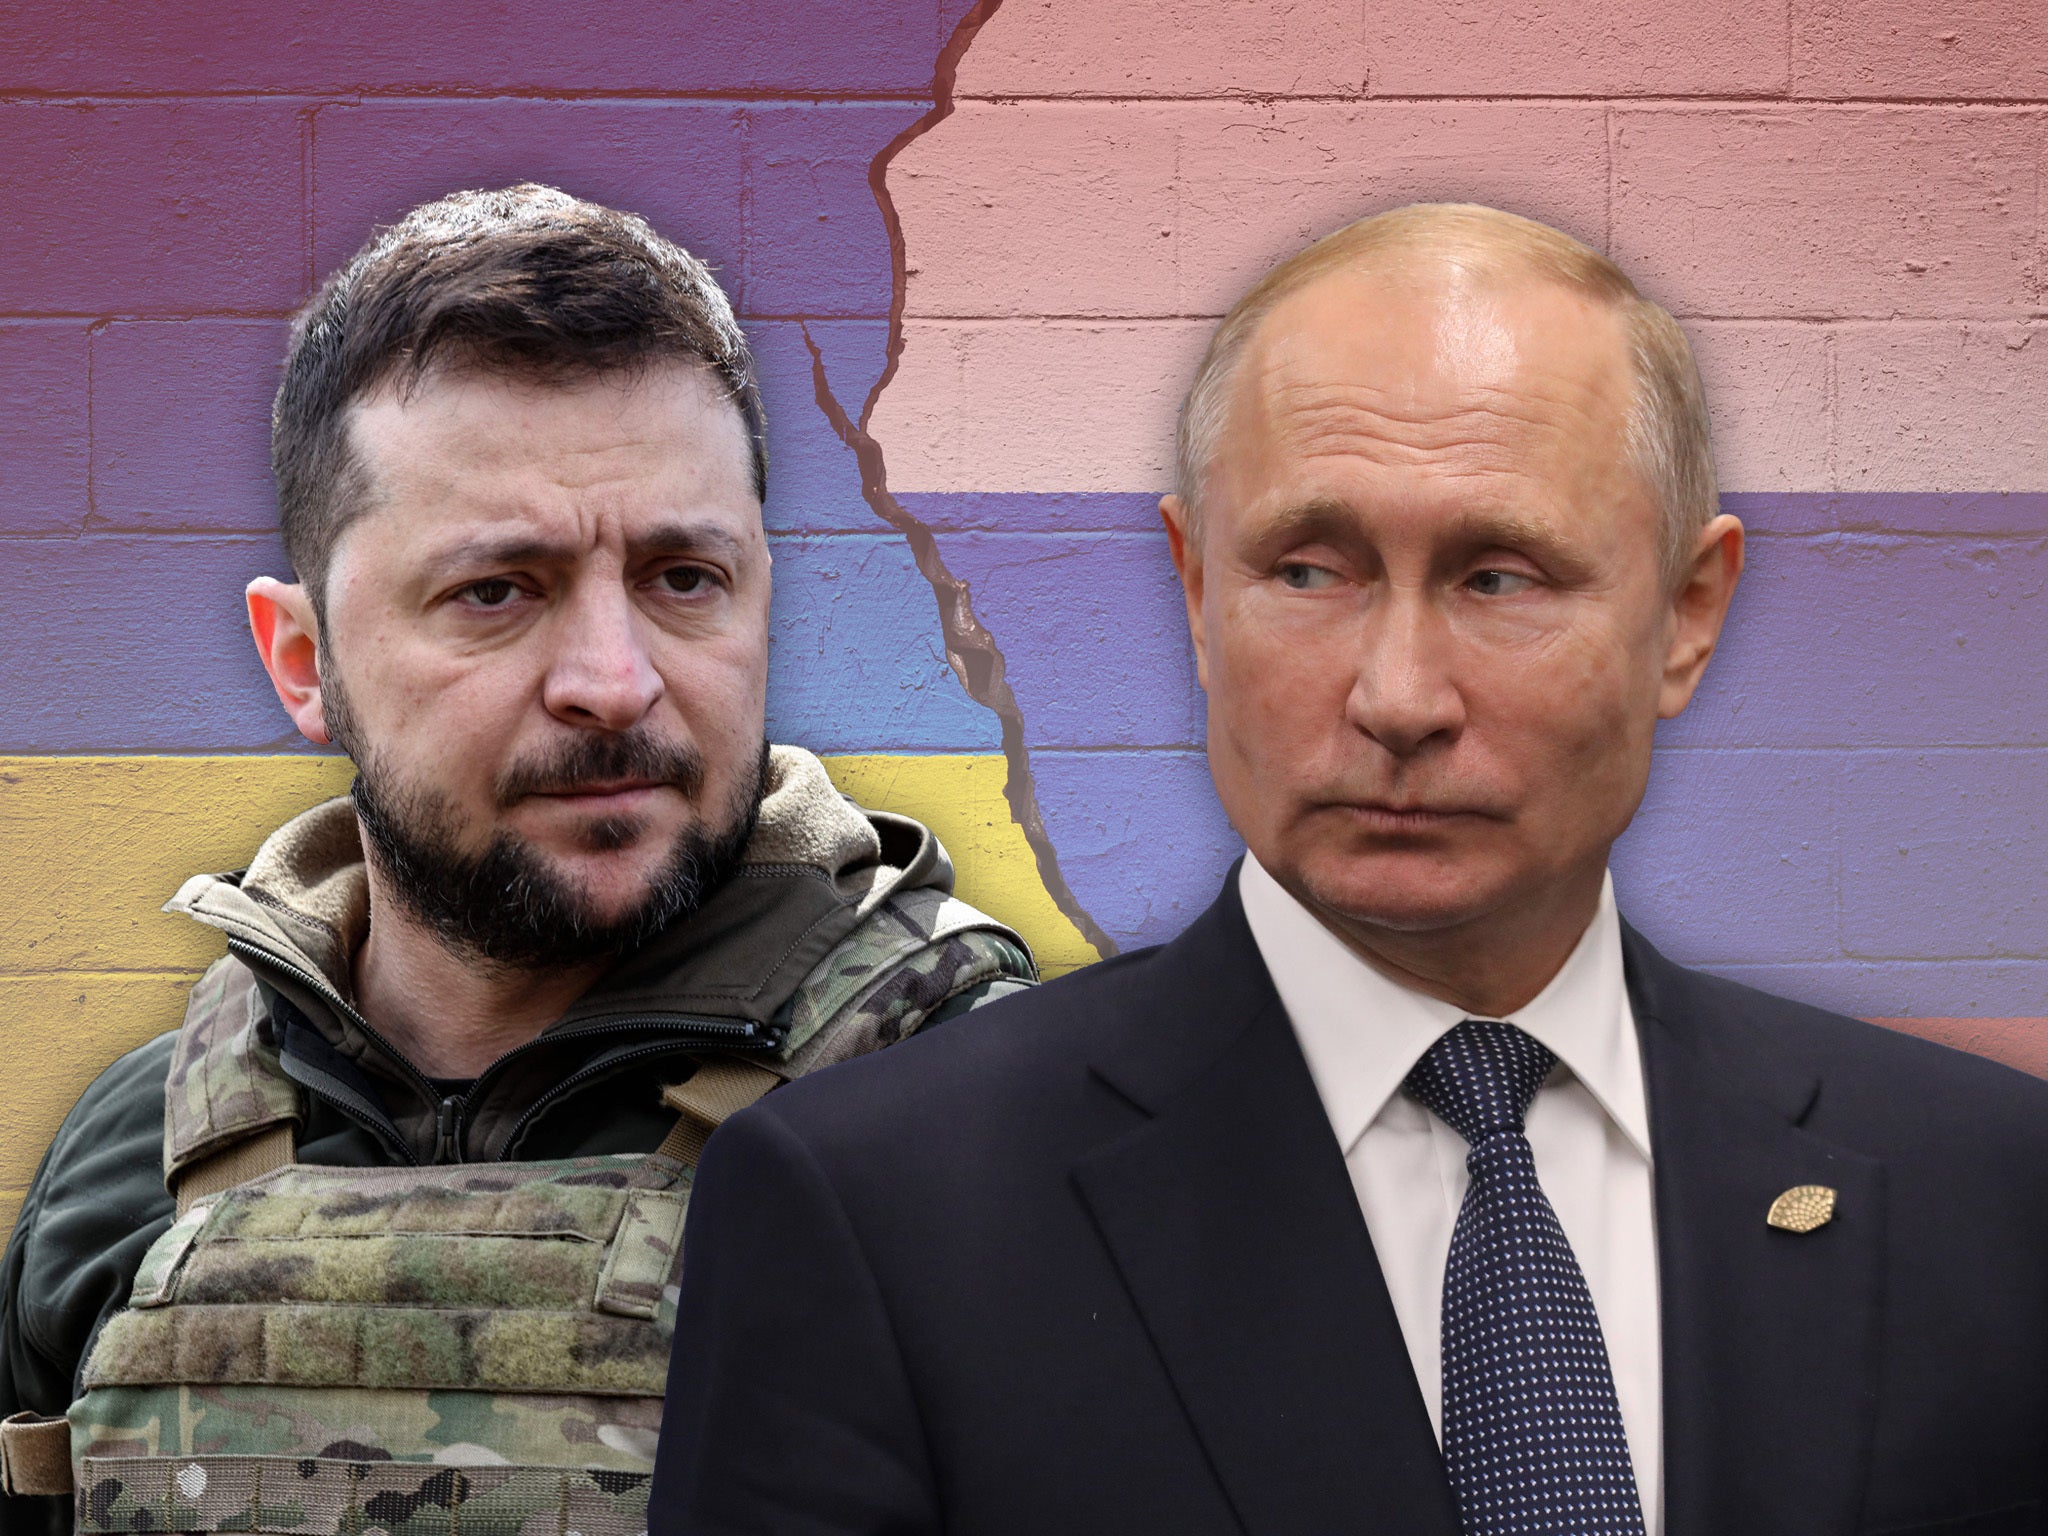 Putin v Zelensky: The personality clash that has defined the war in Ukraine  | The Independent